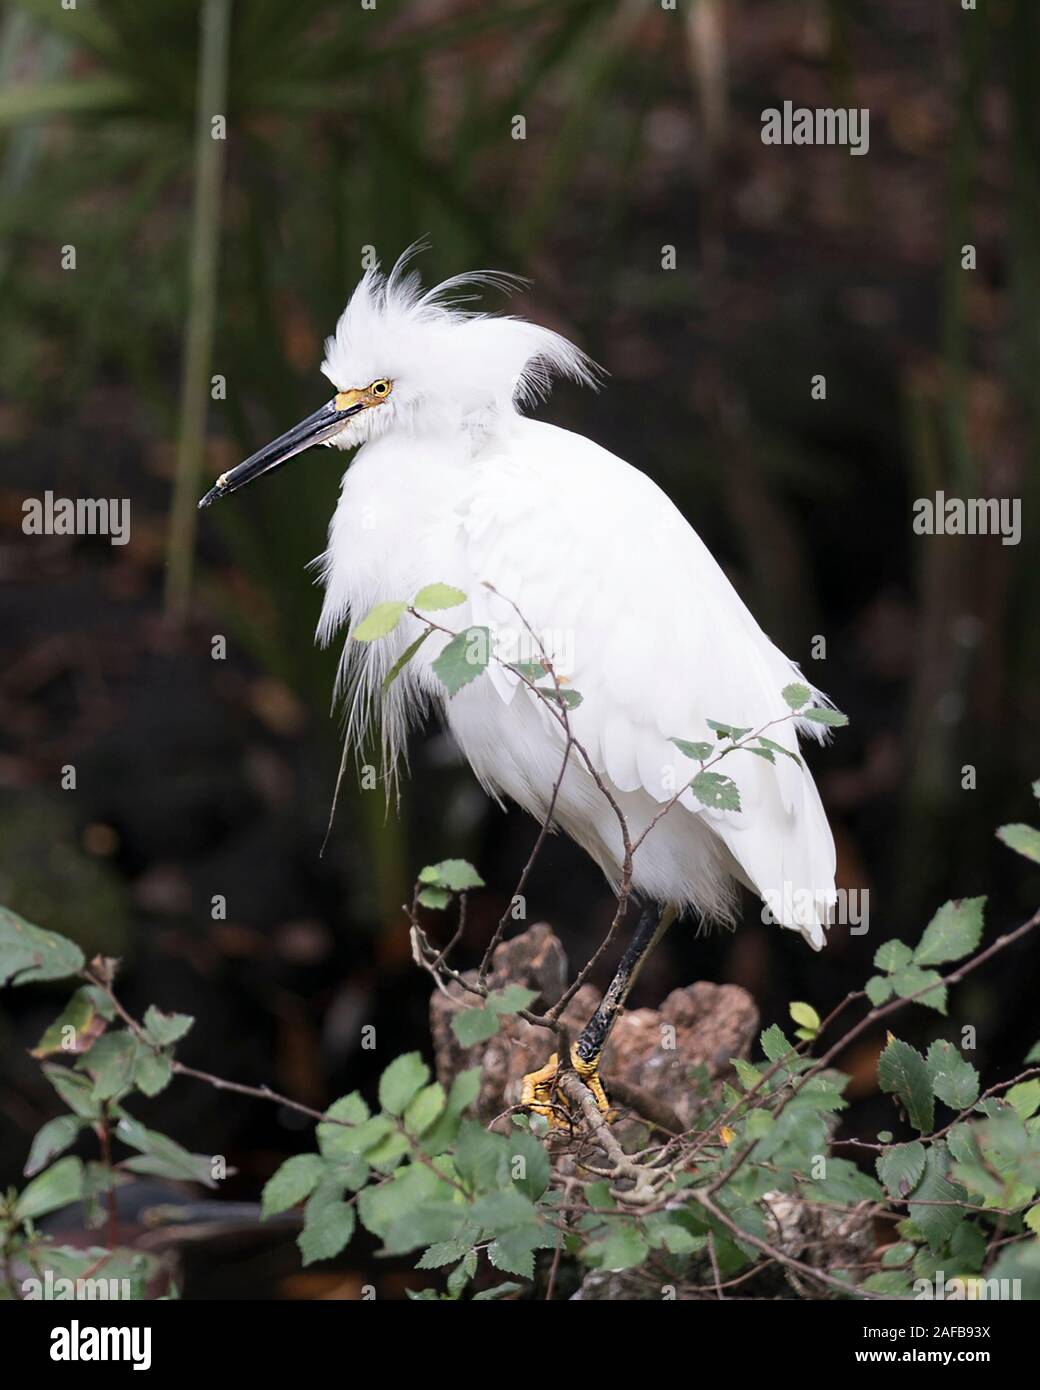 Snowy Egret close up profile view perched on branch displaying white plumage, fluffy plumage, head, beak, eye, feet in its environment and surrounding Stock Photo